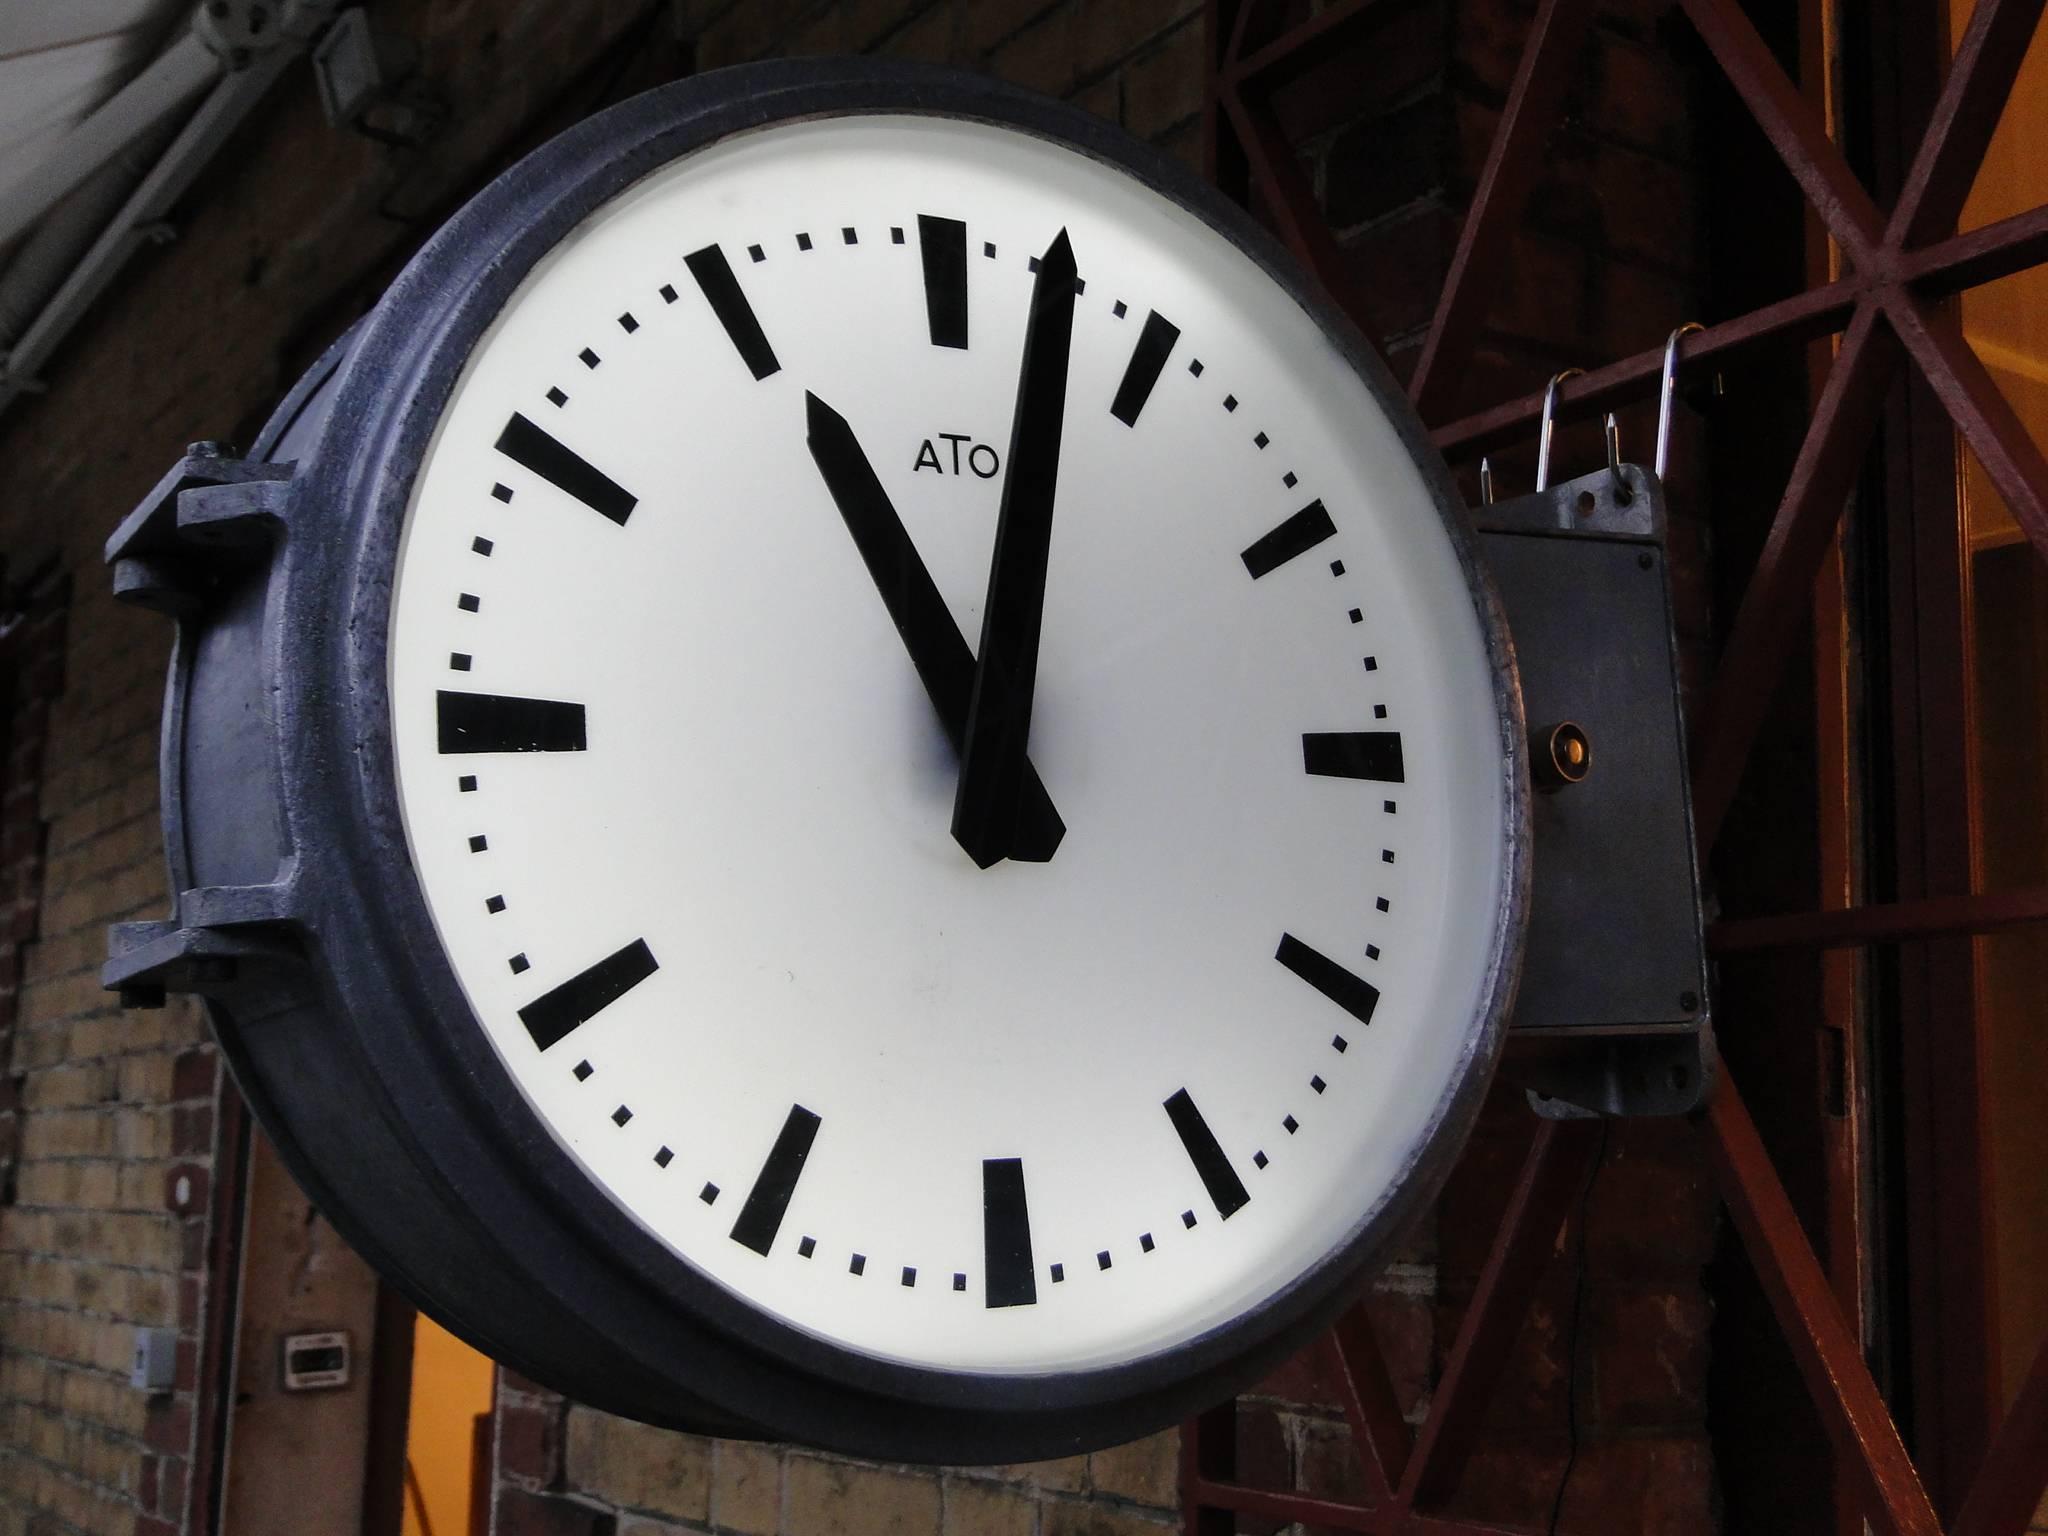 Vintage French station, railway, factory Ato clock.

Double sided with glass and lighting

The frame is aluminium with glass.

You can turn the dial inside from the clock as you like.